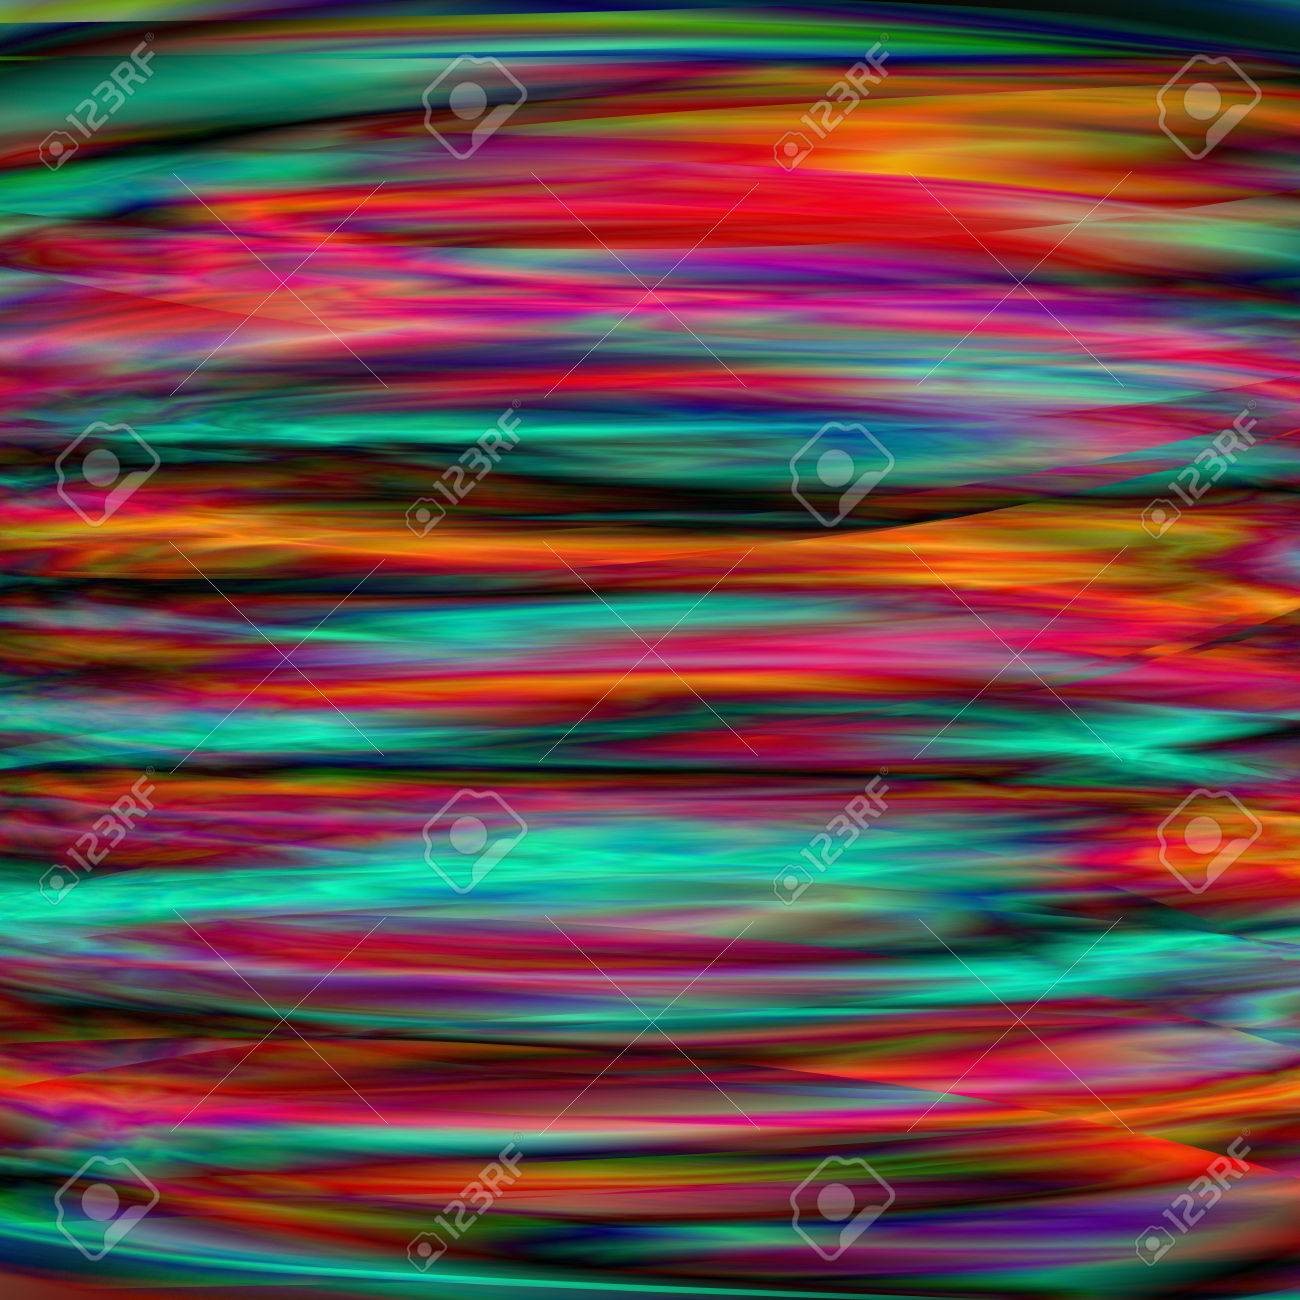 Unique Abstract Mesh Background The Design Of Refraction